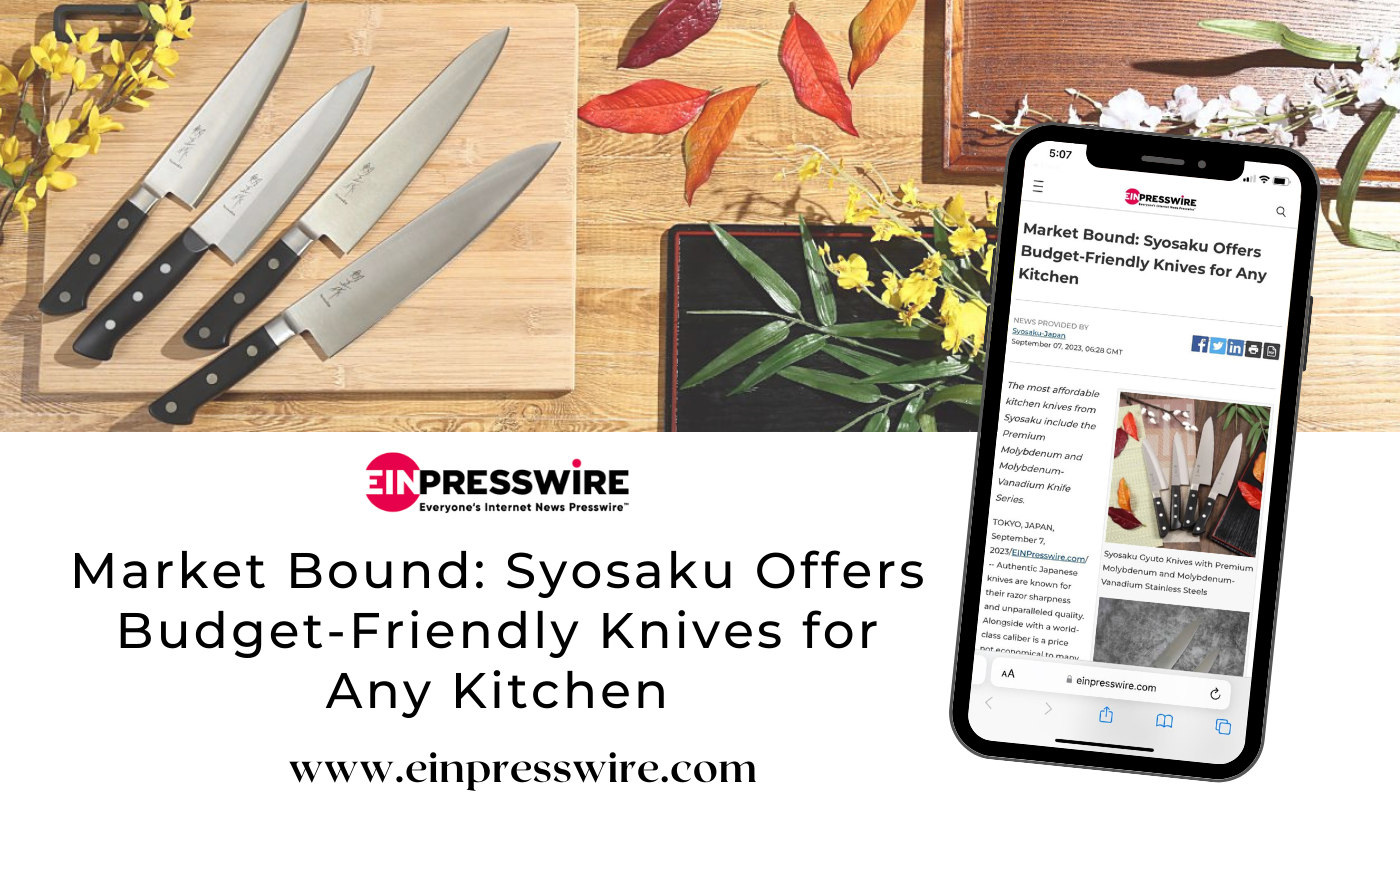 Syosaku offers budget-friendly knive for any kitchen